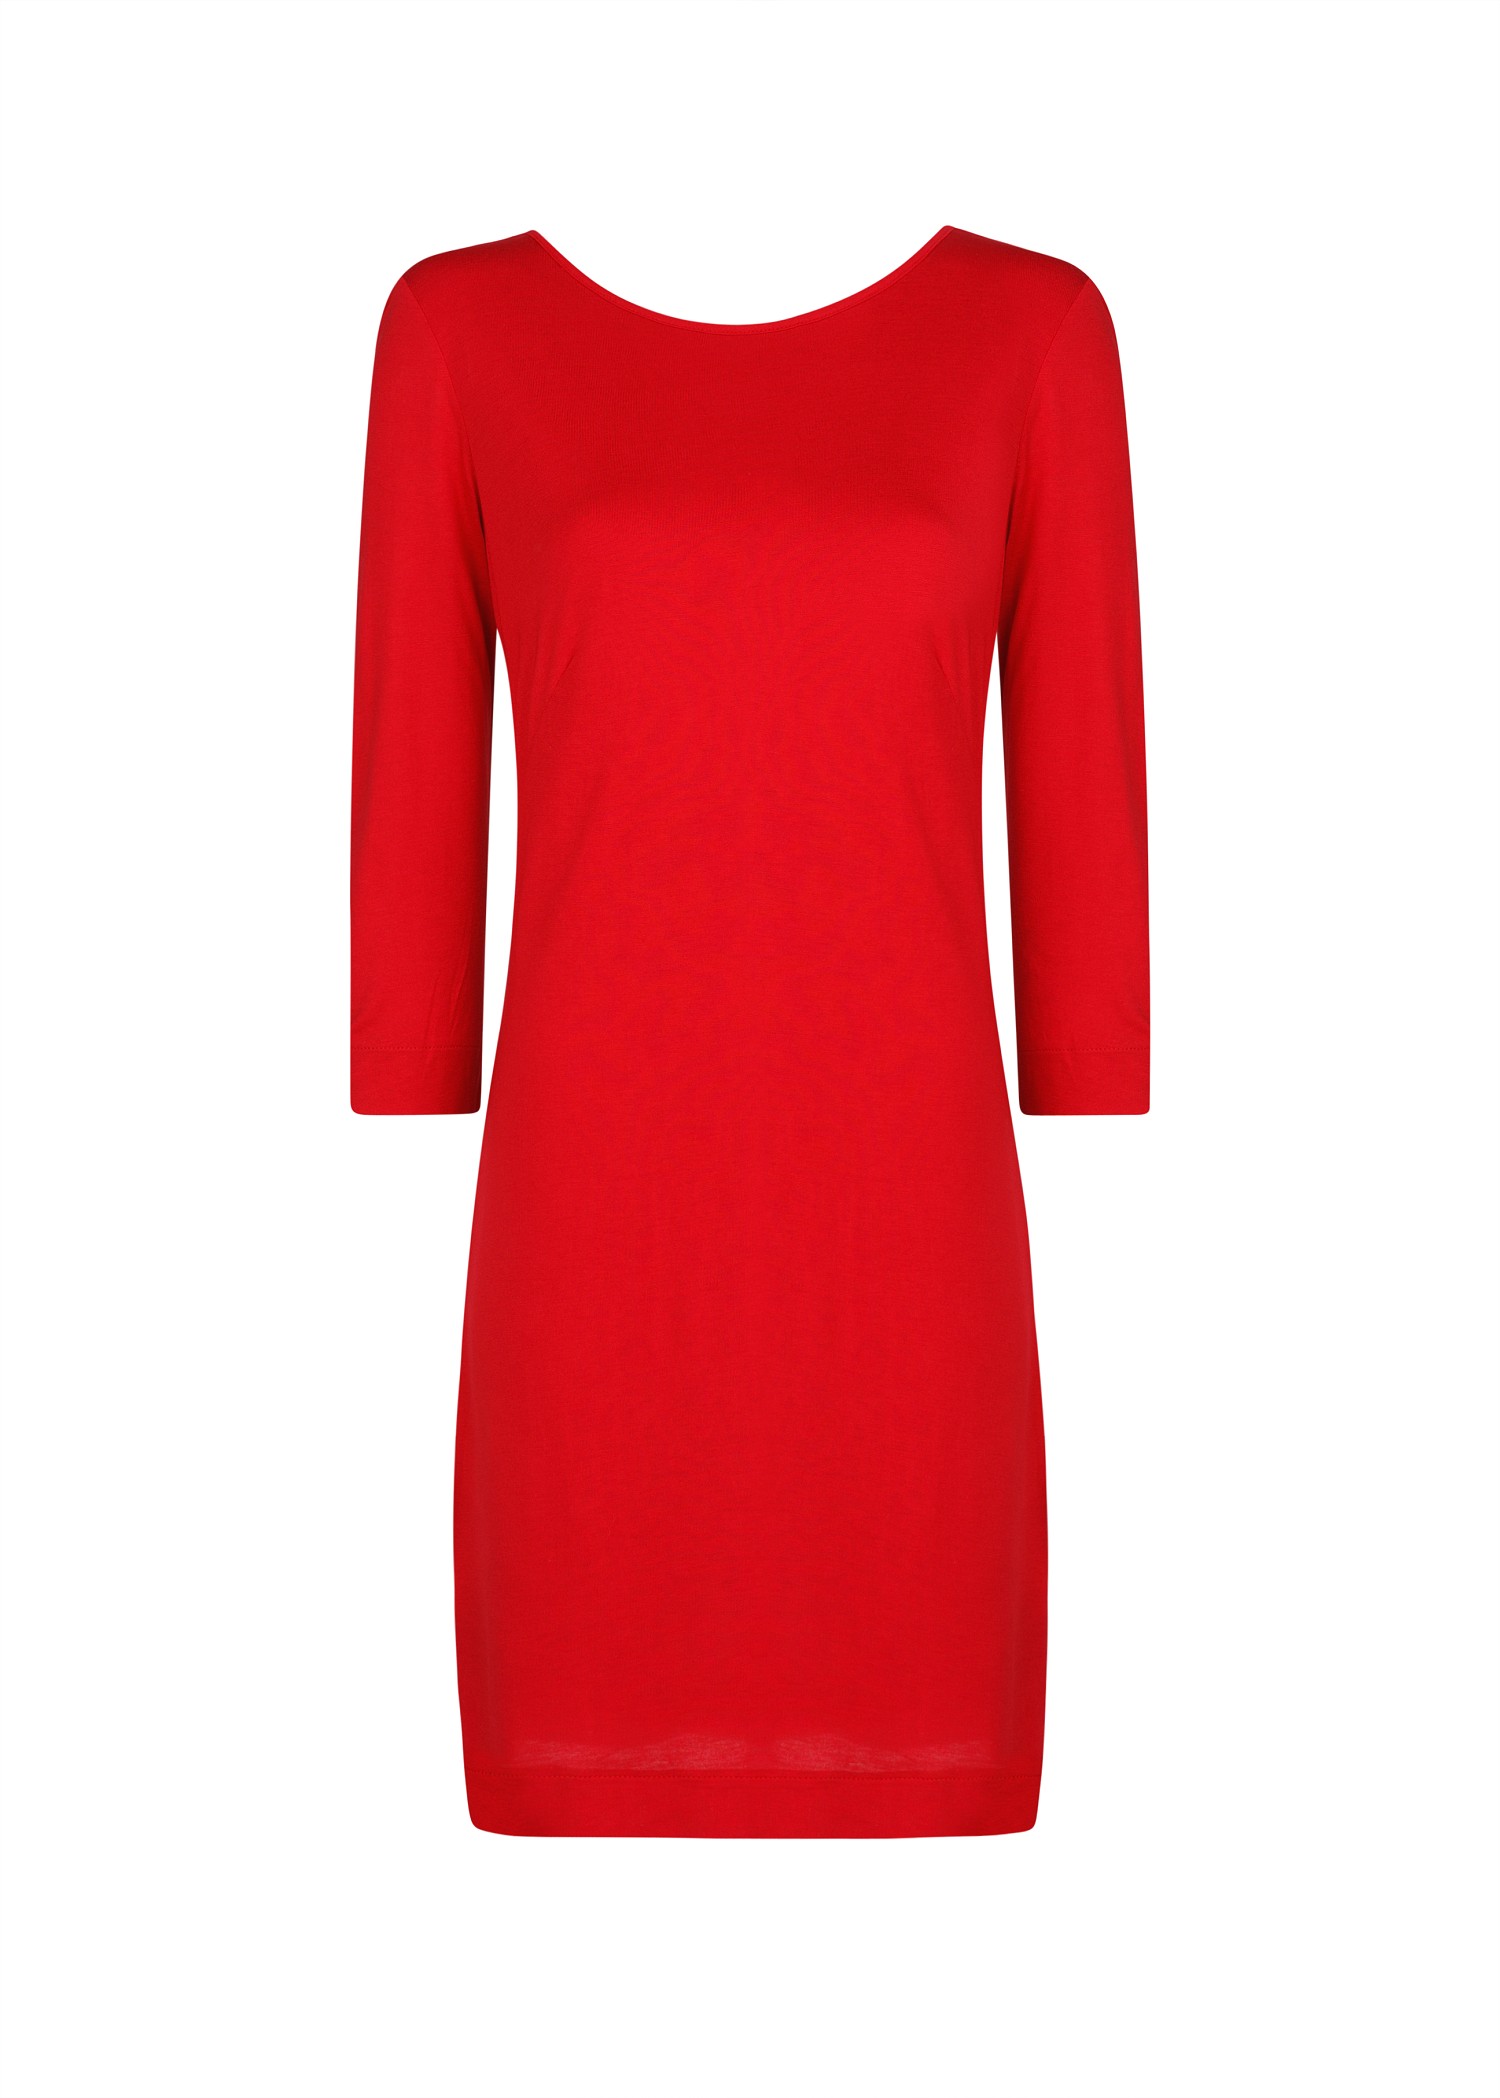 Mango Metal Detail Straight Fit Dress in Red | Lyst